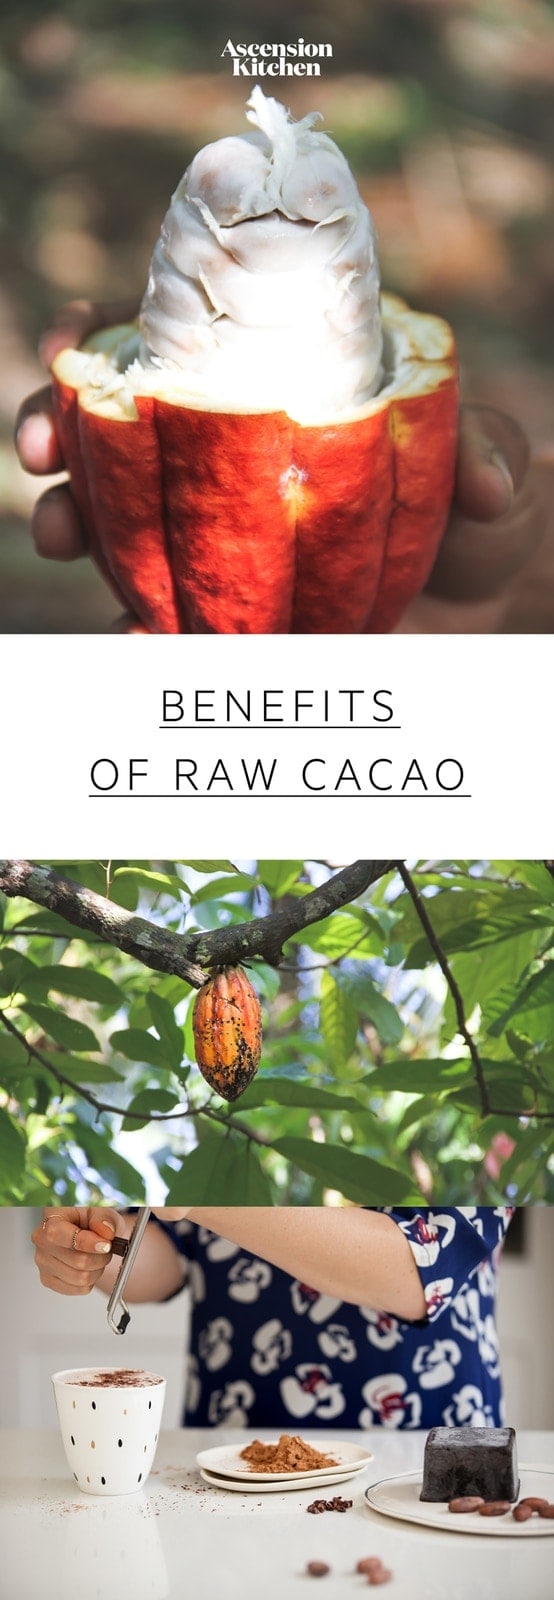 Nutrition & Health Benefits of Cacao: learn how raw cacao differs from cocoa & why cacao is so beneficial. #benefitscacao #cacaobenefits #cacaonutrition #cacaopowderbenefits #rawcacaopowder #cacaopowderrecipes #superfoods #AscensionKitchen 